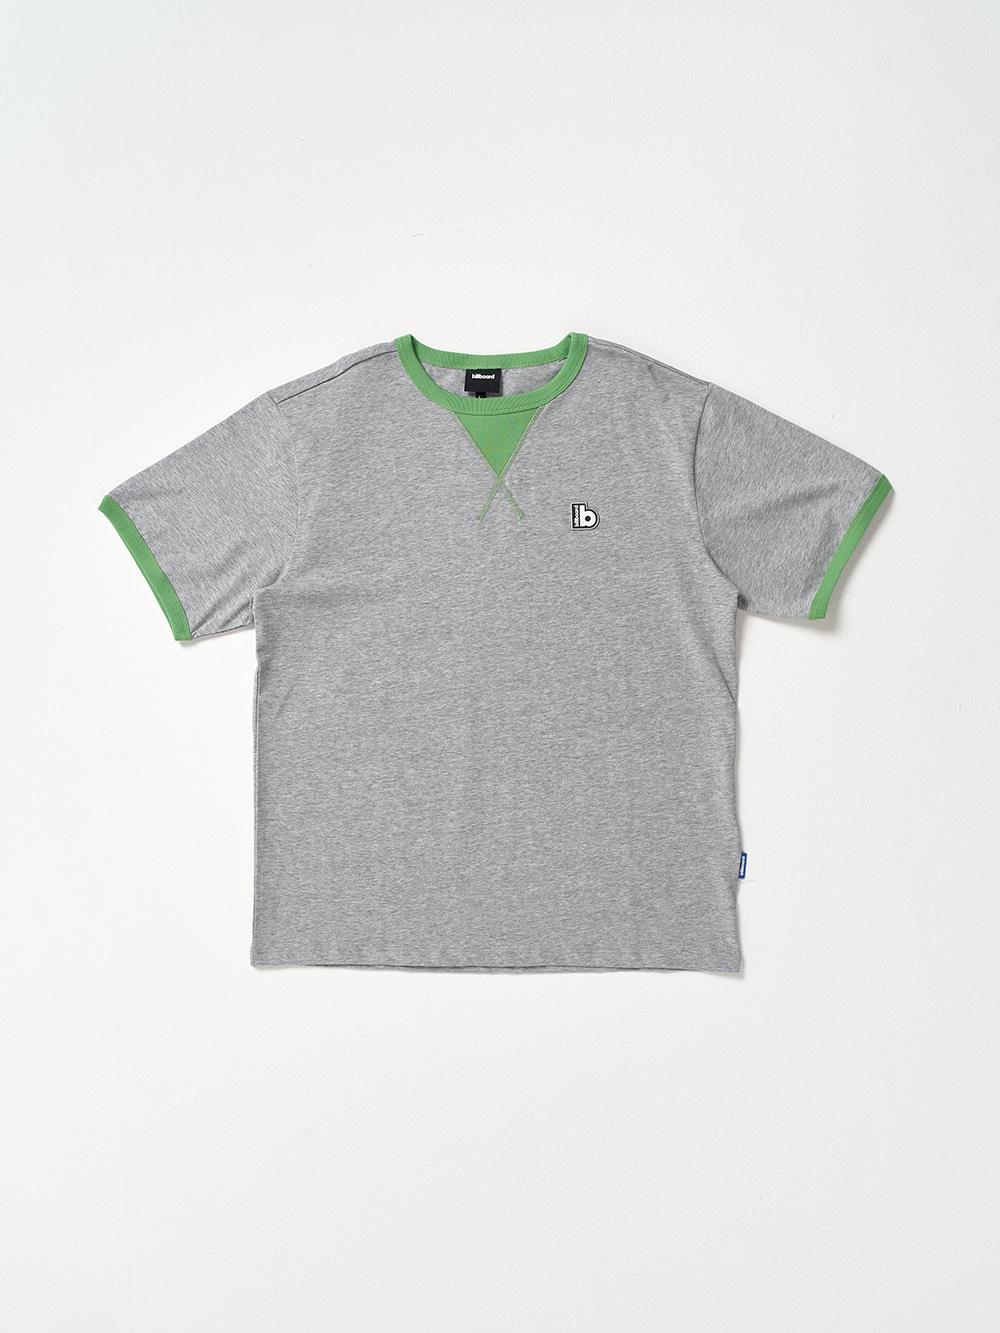 Neck Point Colored Half T-shirts_Light Grey